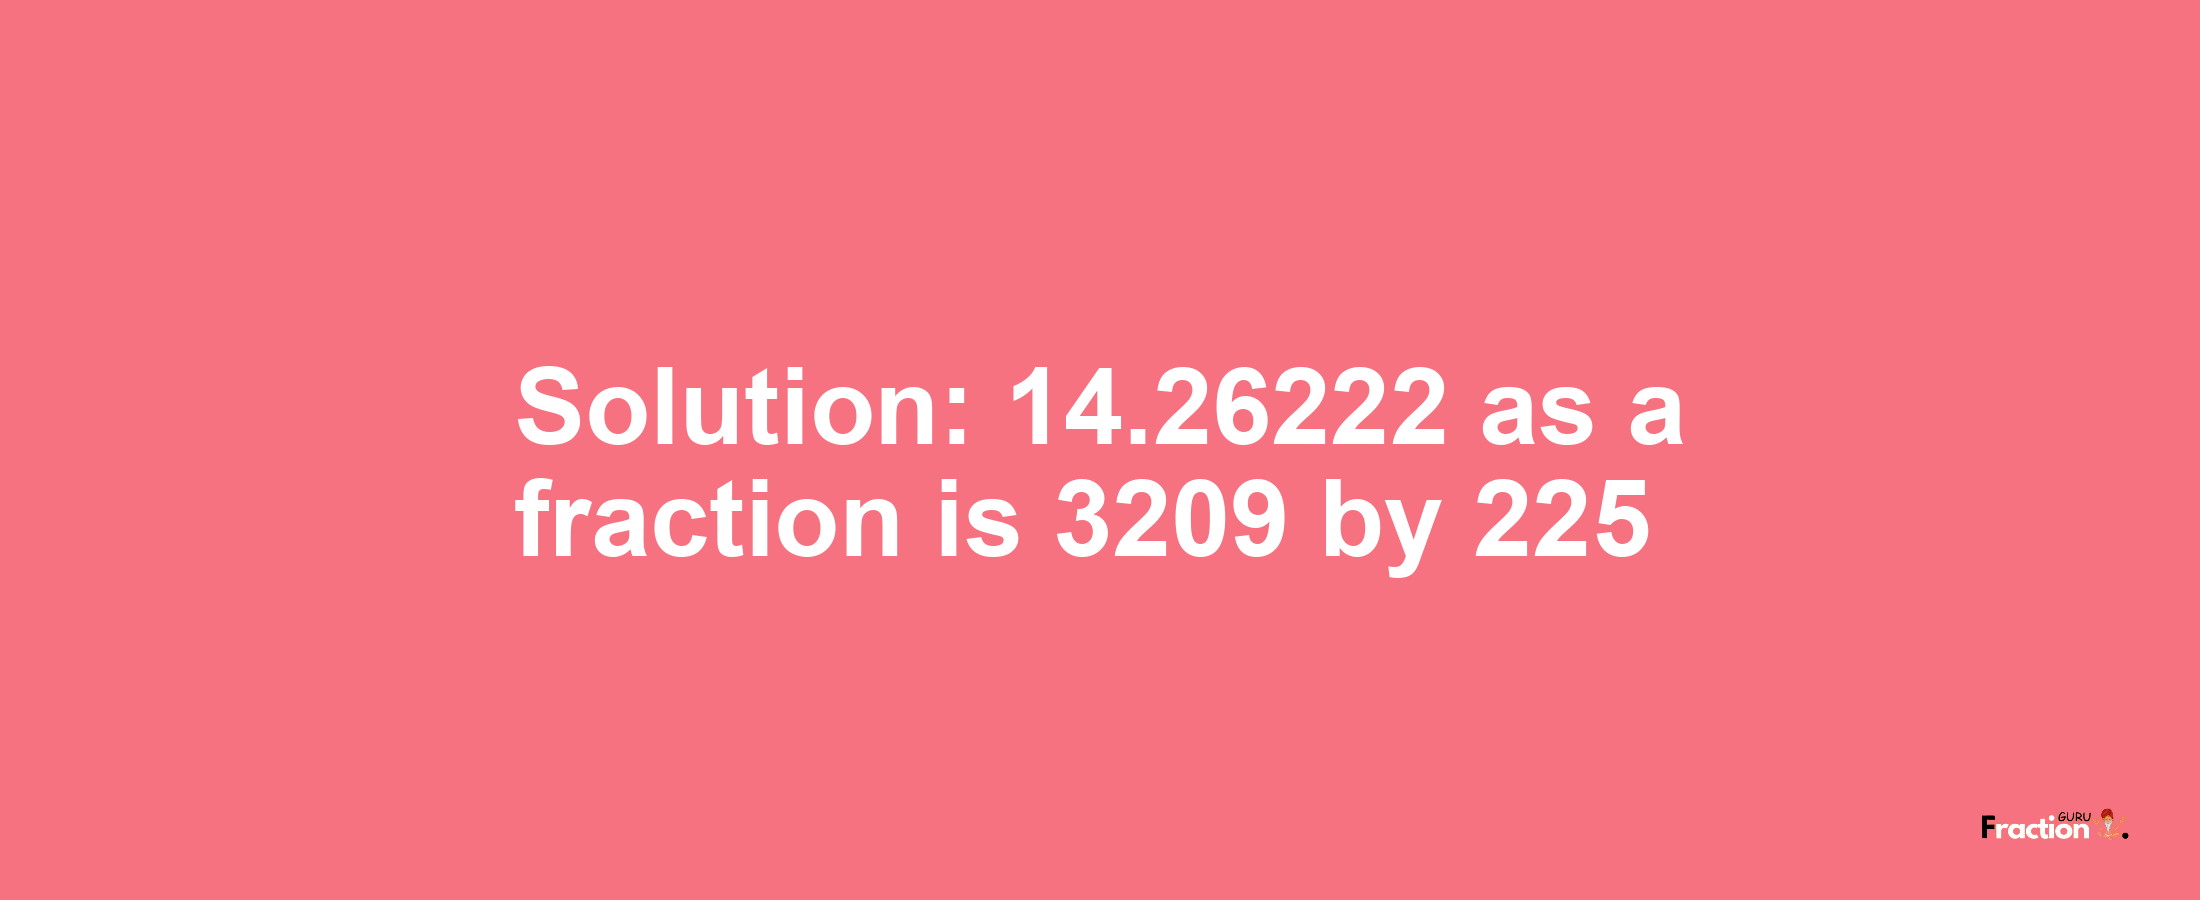 Solution:14.26222 as a fraction is 3209/225